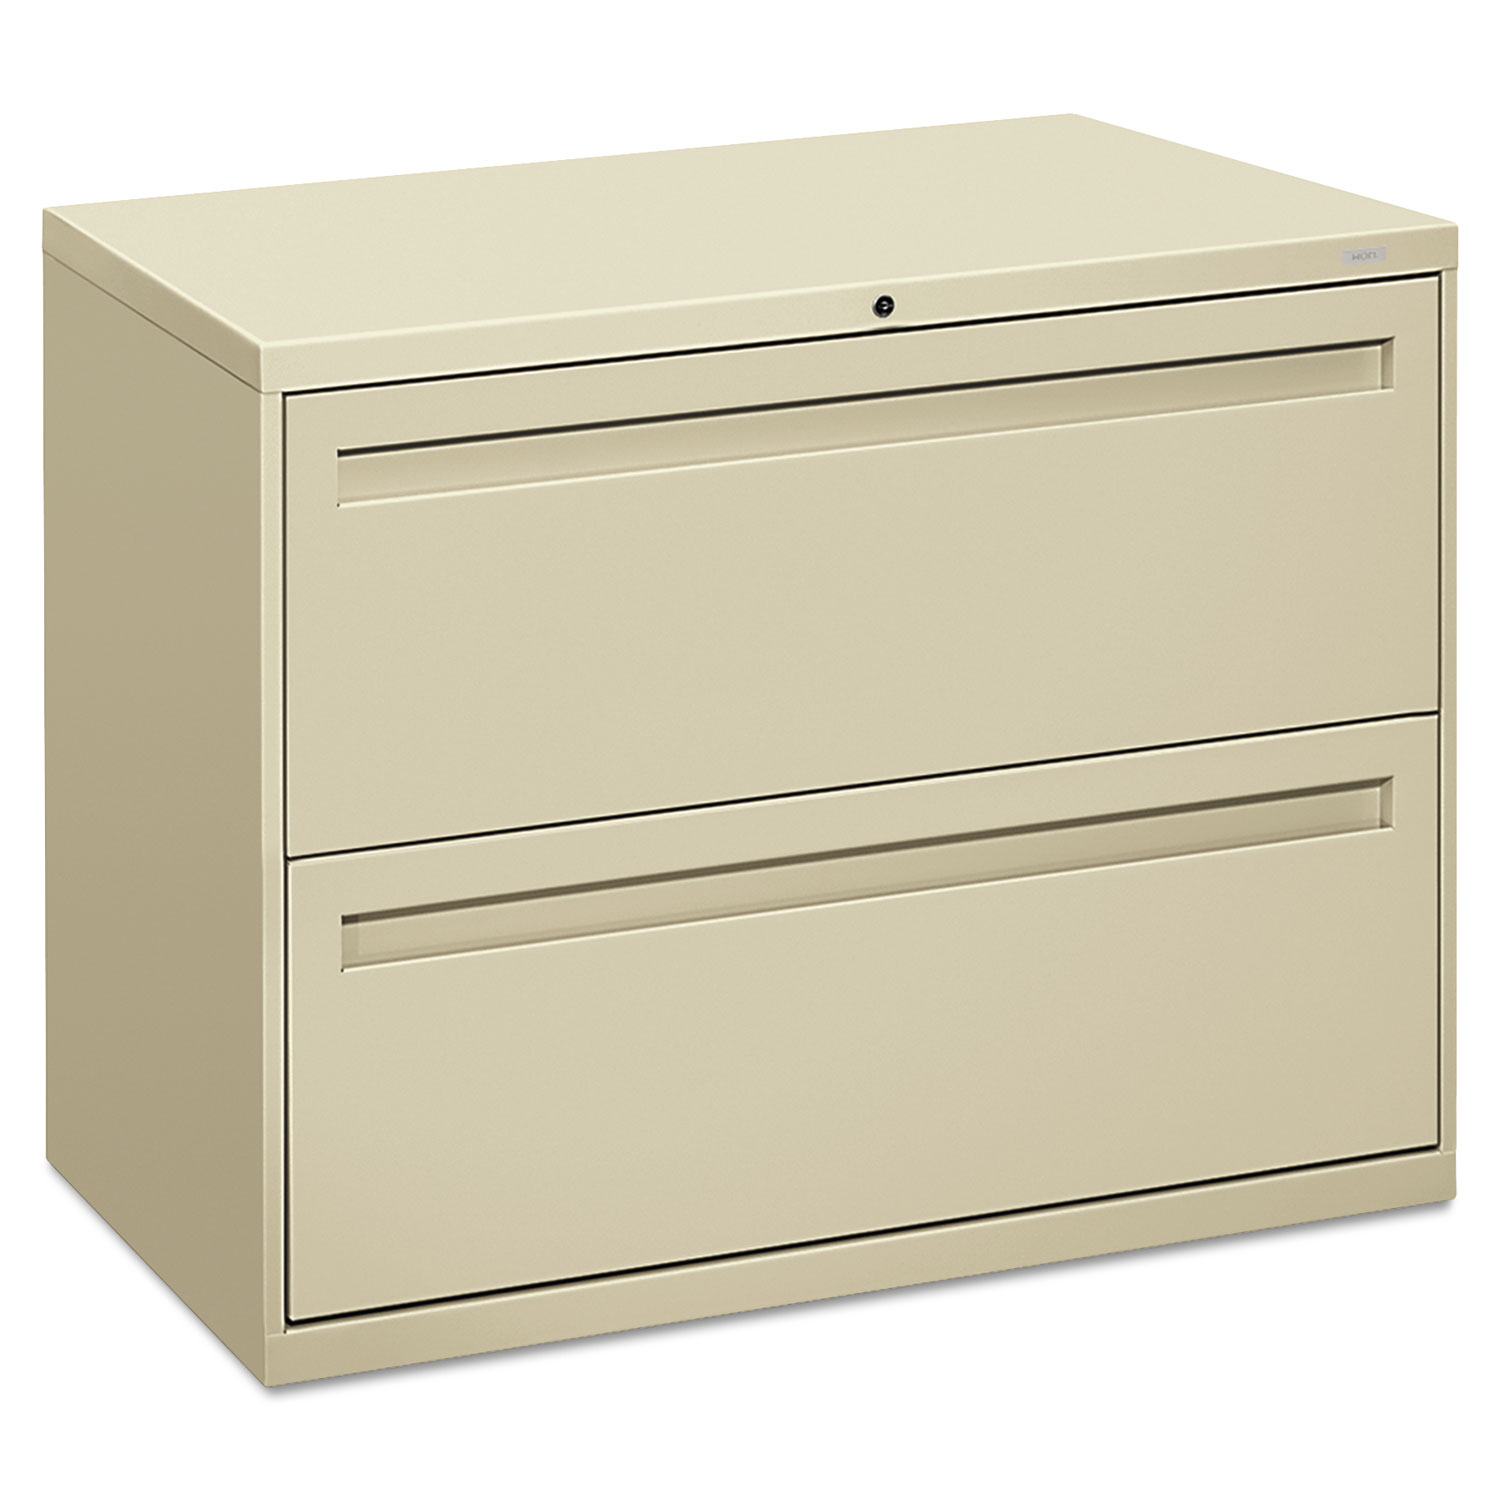 700 Series Two-Drawer Lateral File, 36w x 19-1/4d, Putty